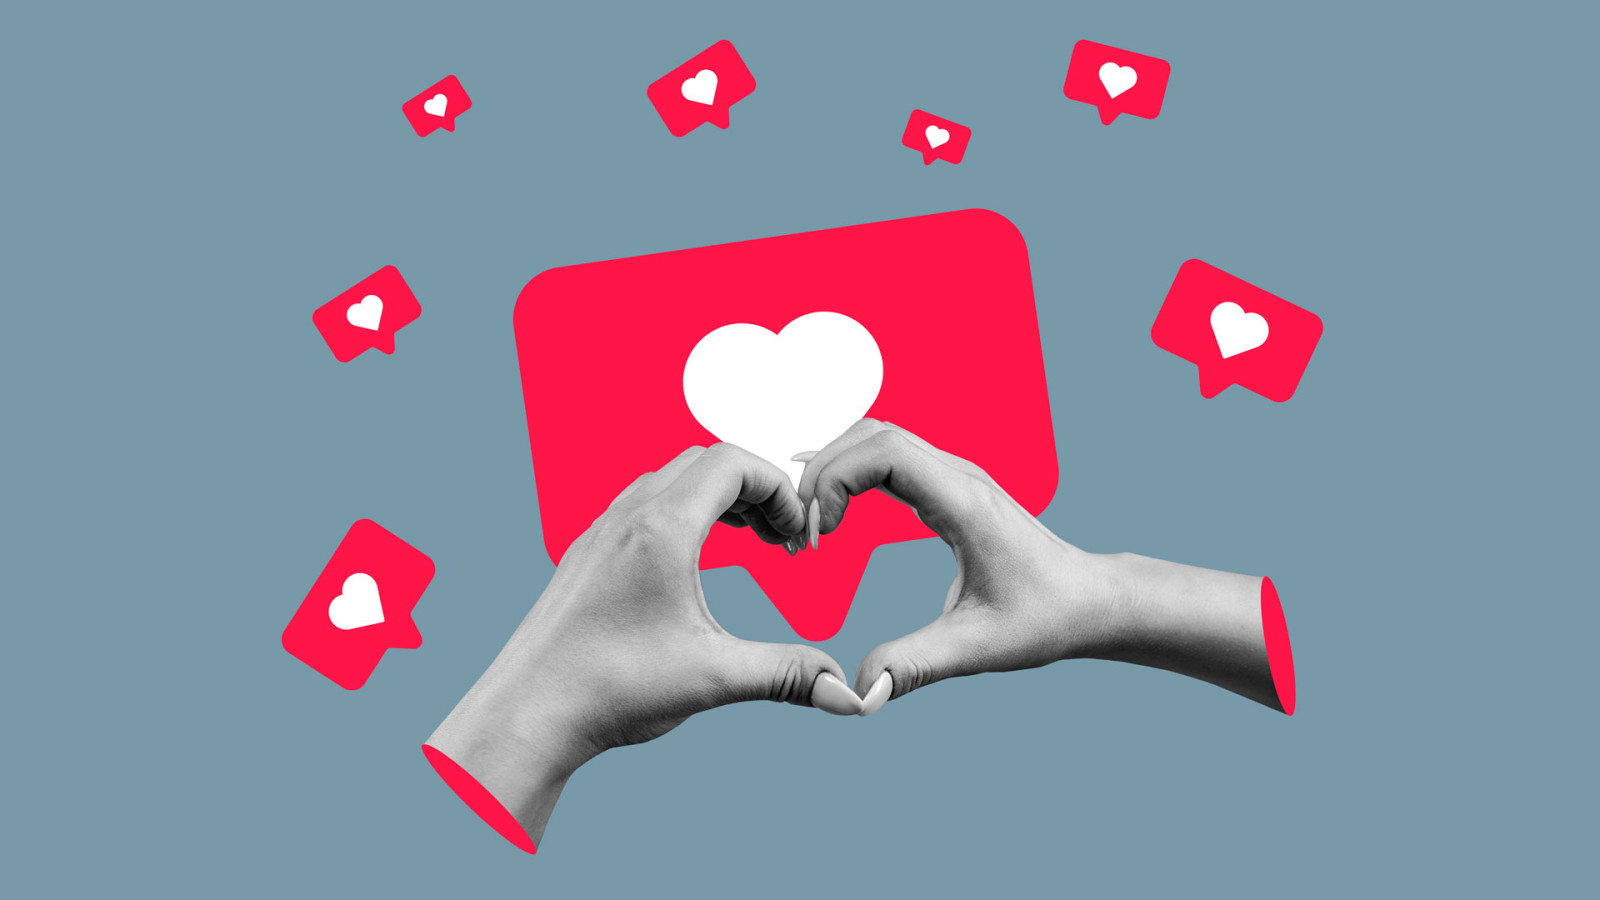 Social media like icons. Contemporary art collage of hands making heart shape isolated over grey background.